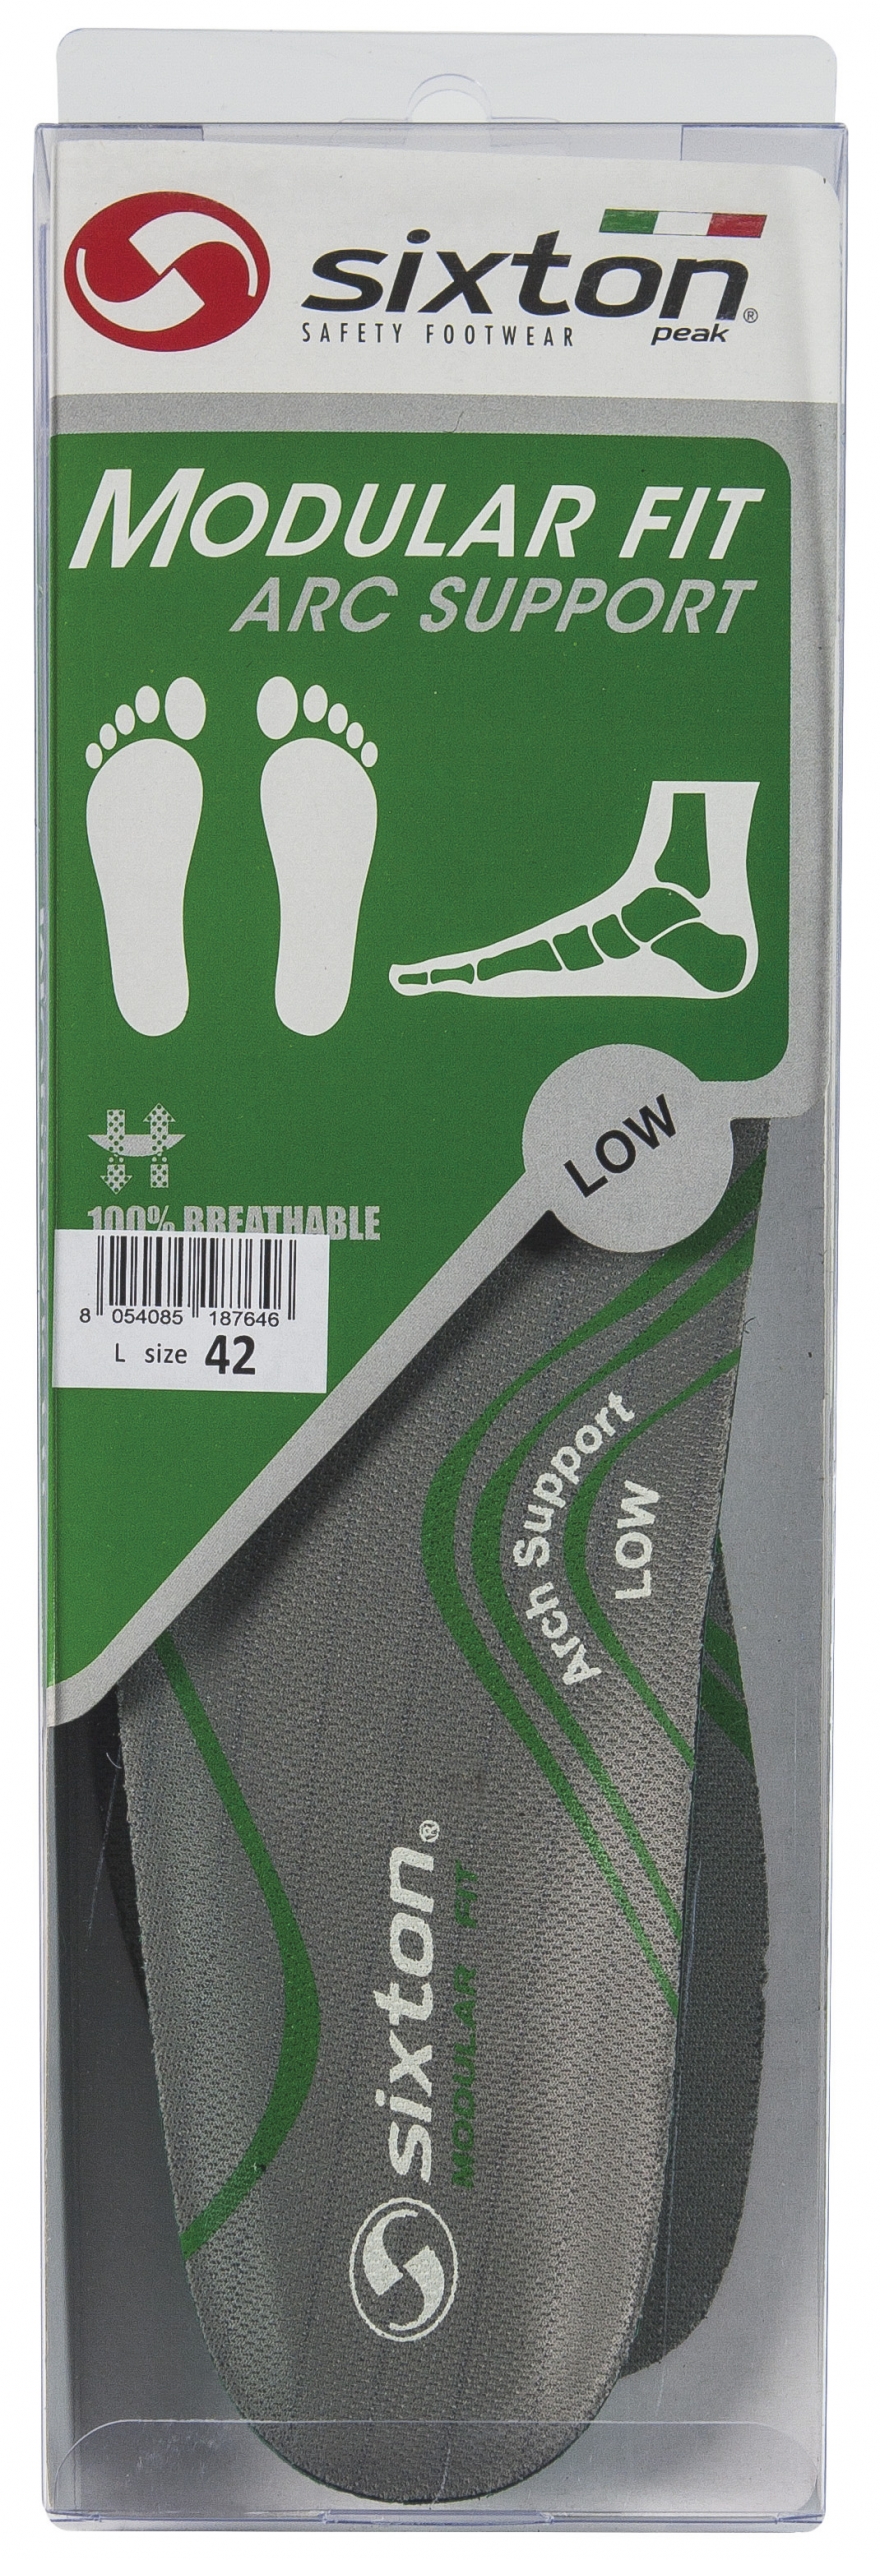 ModularFit "Low Arch" Insole-image